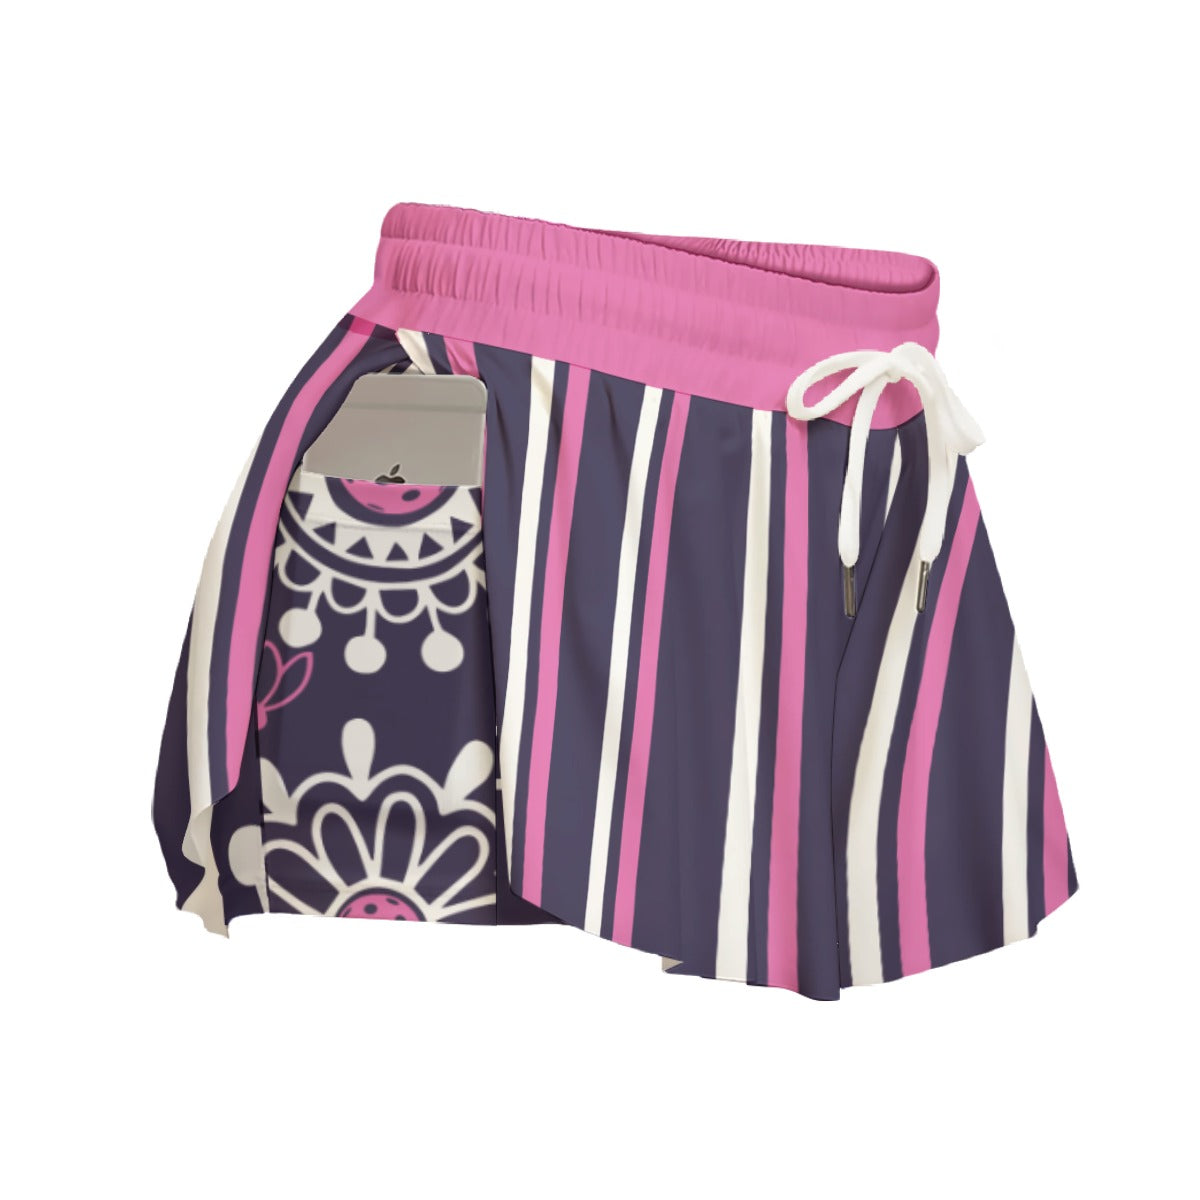 Dizzy Pickle Coming Up Daisies PP Stripes Pickleball Women's Sport Culottes Skorts with Inner Shorts and Pockets Plum Pink